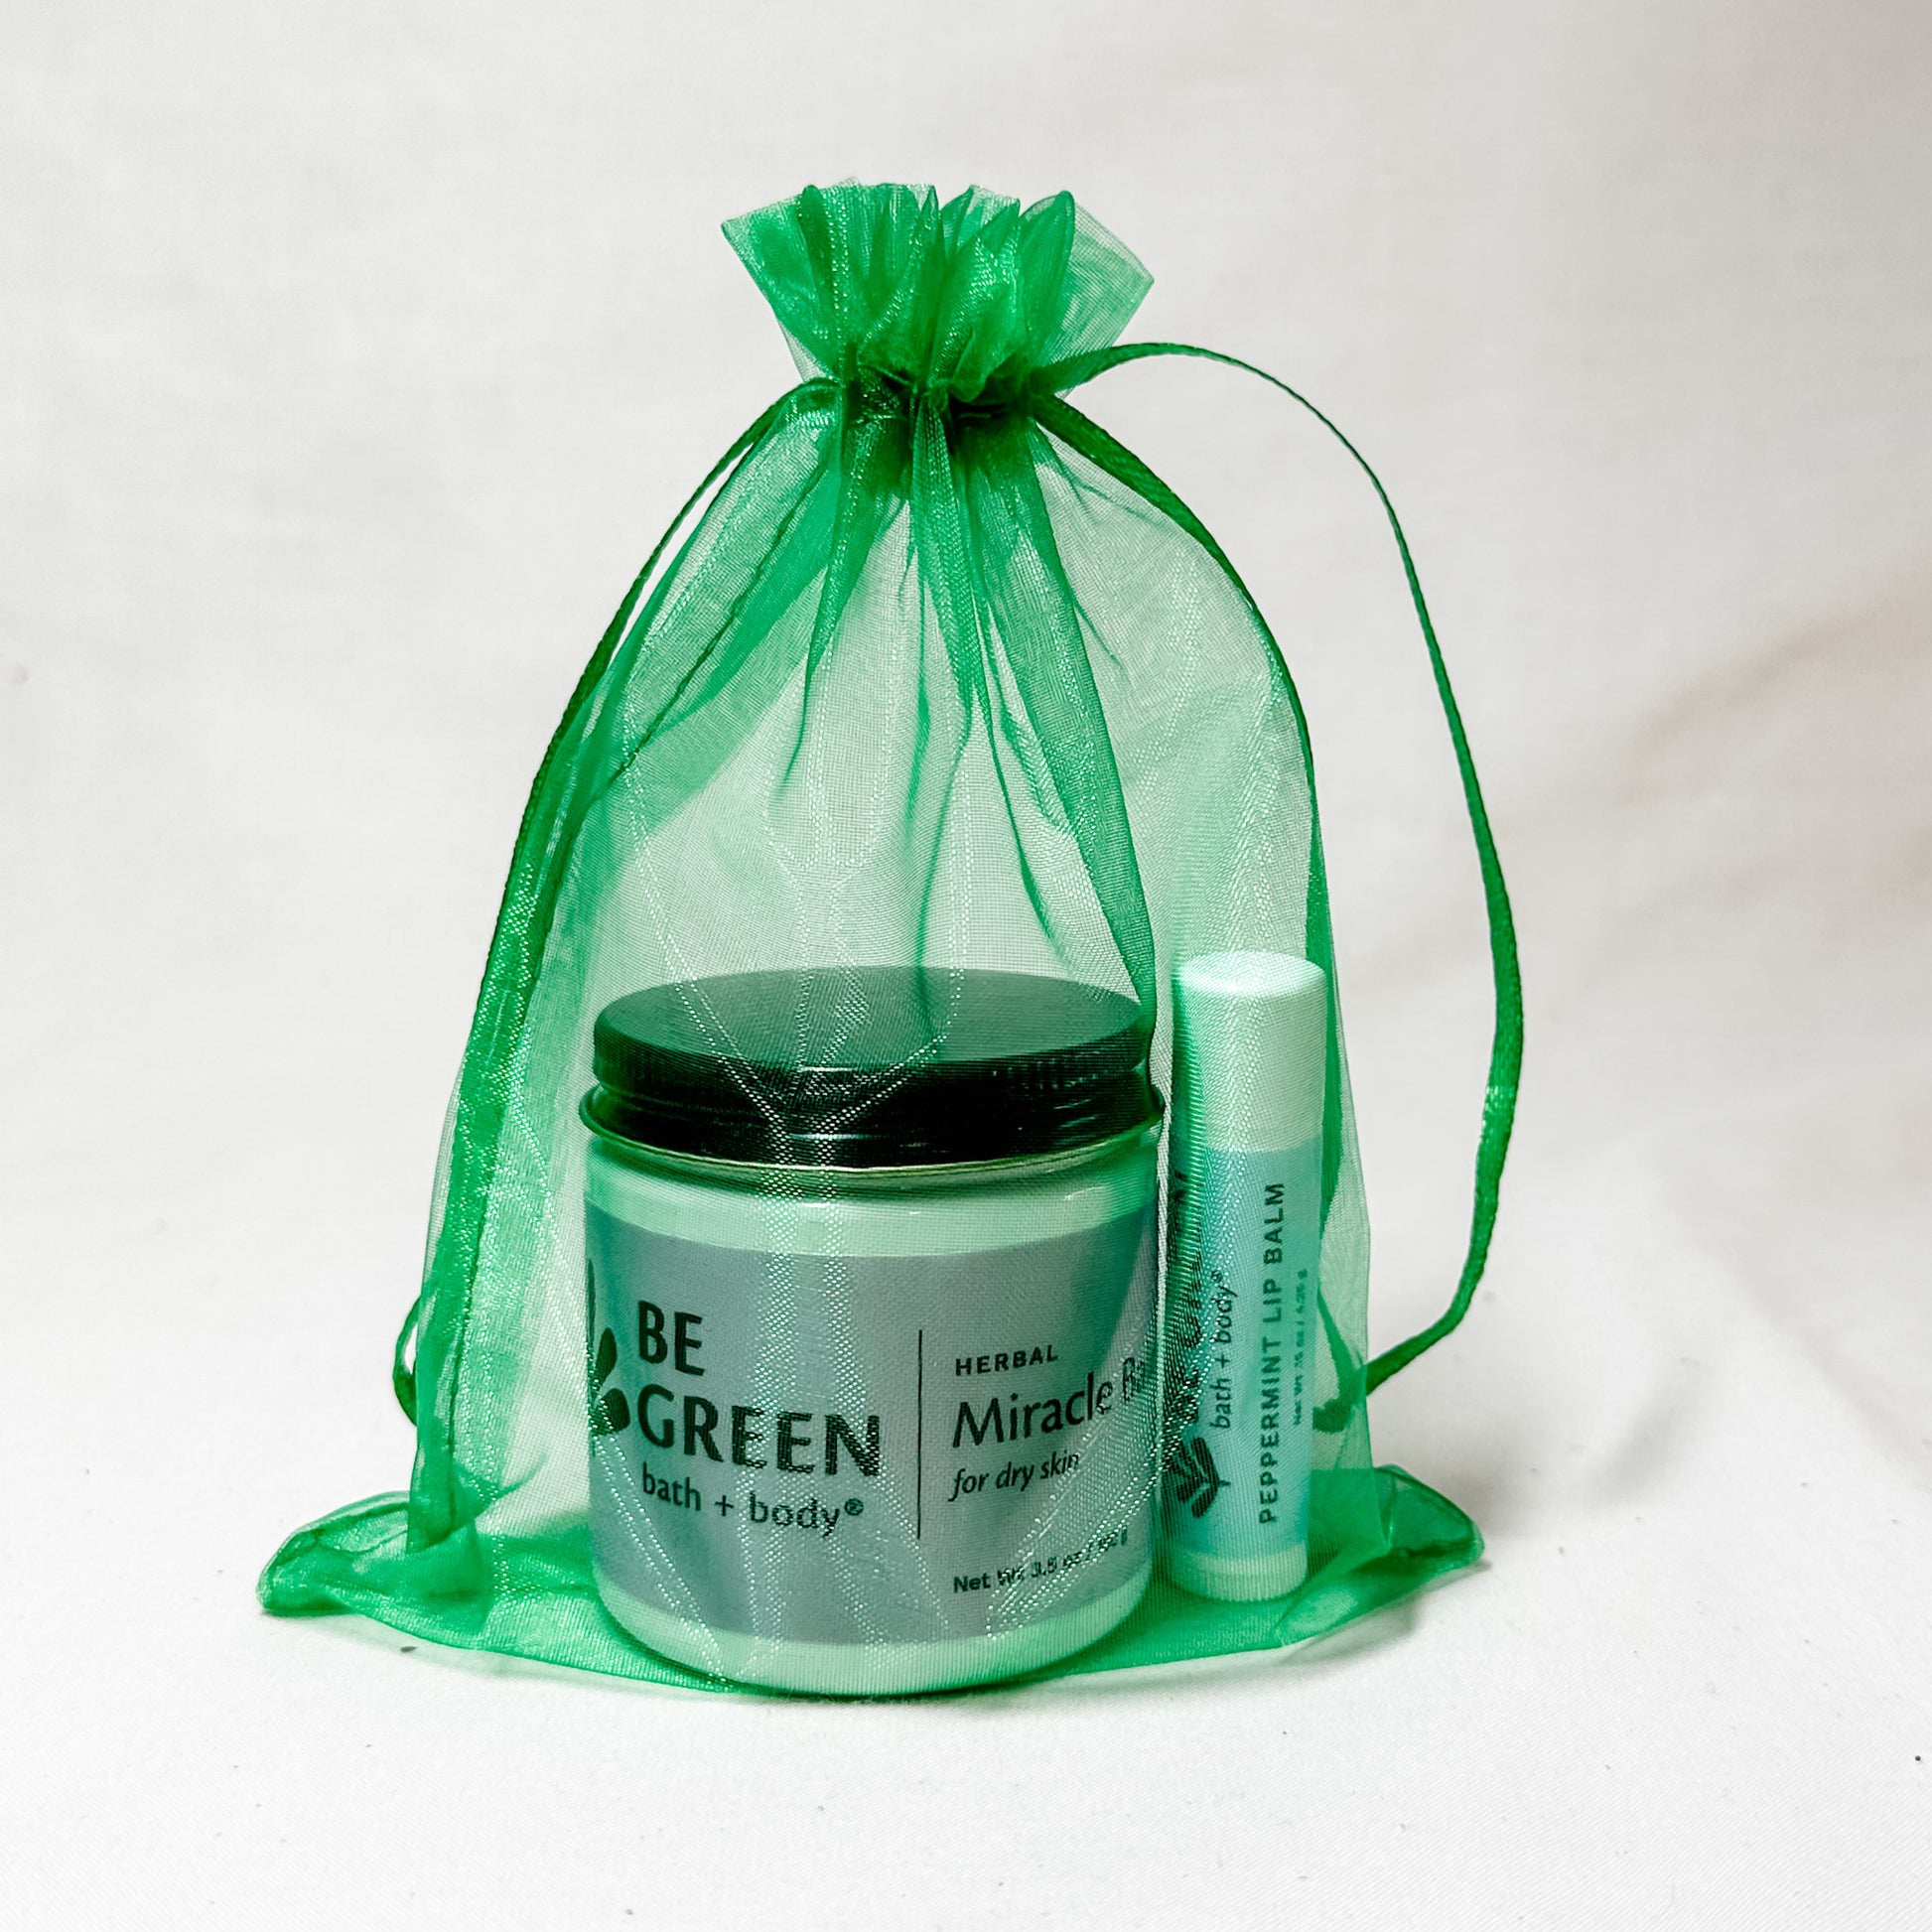 Miracle Balm and Lip Balm Gift Set in a green gift bag